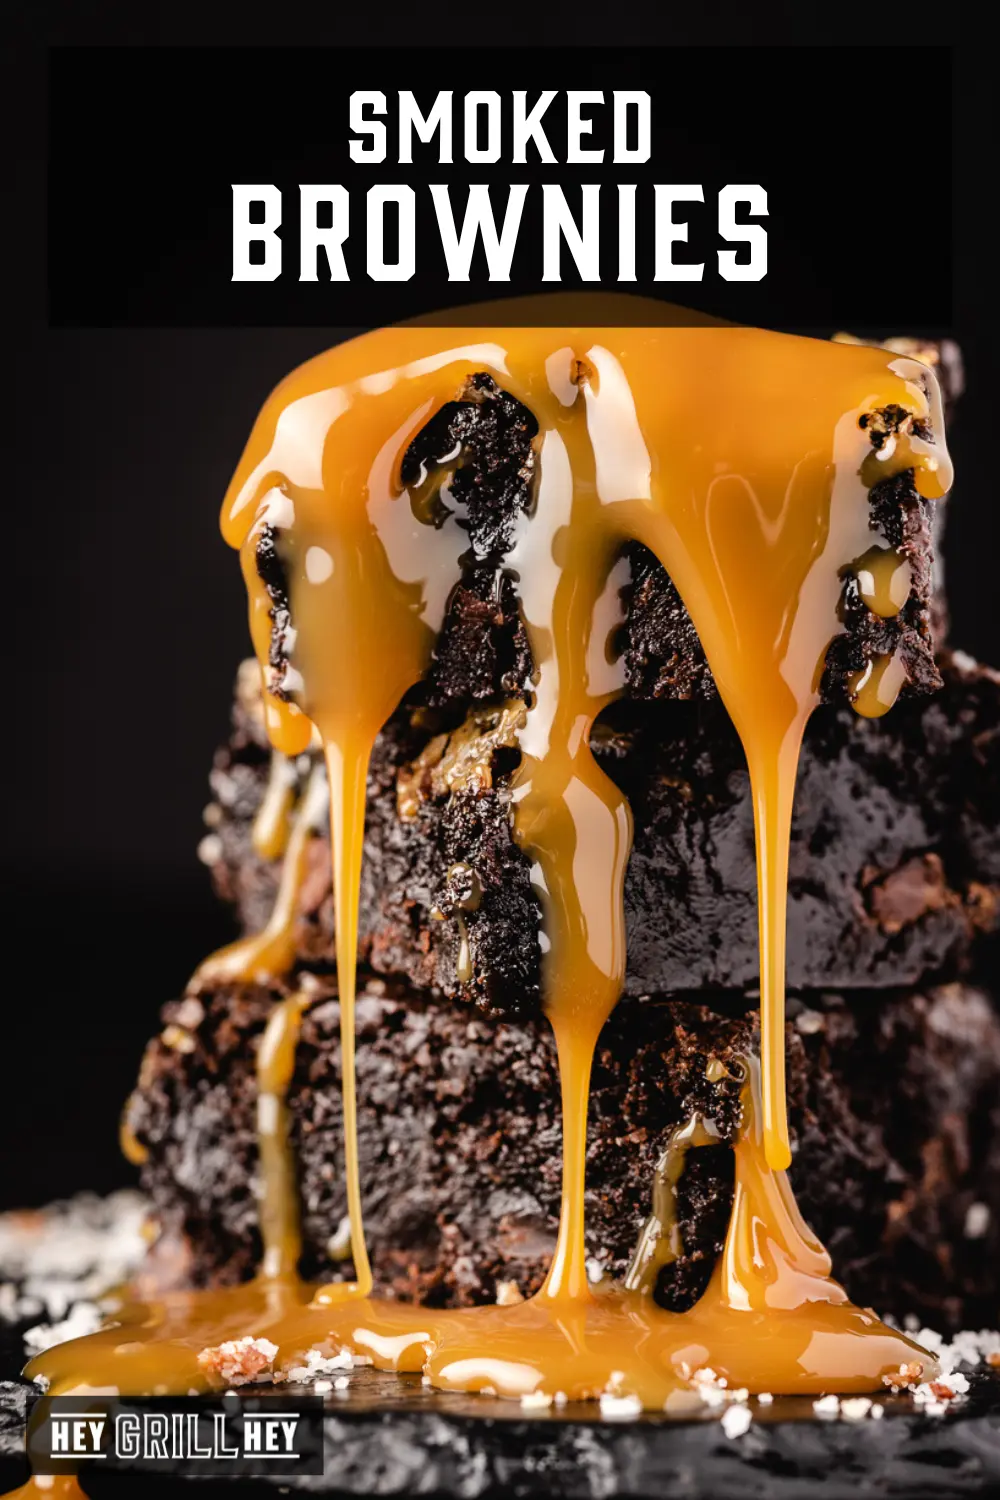 smoked brownies - Do brownies puff up in the oven